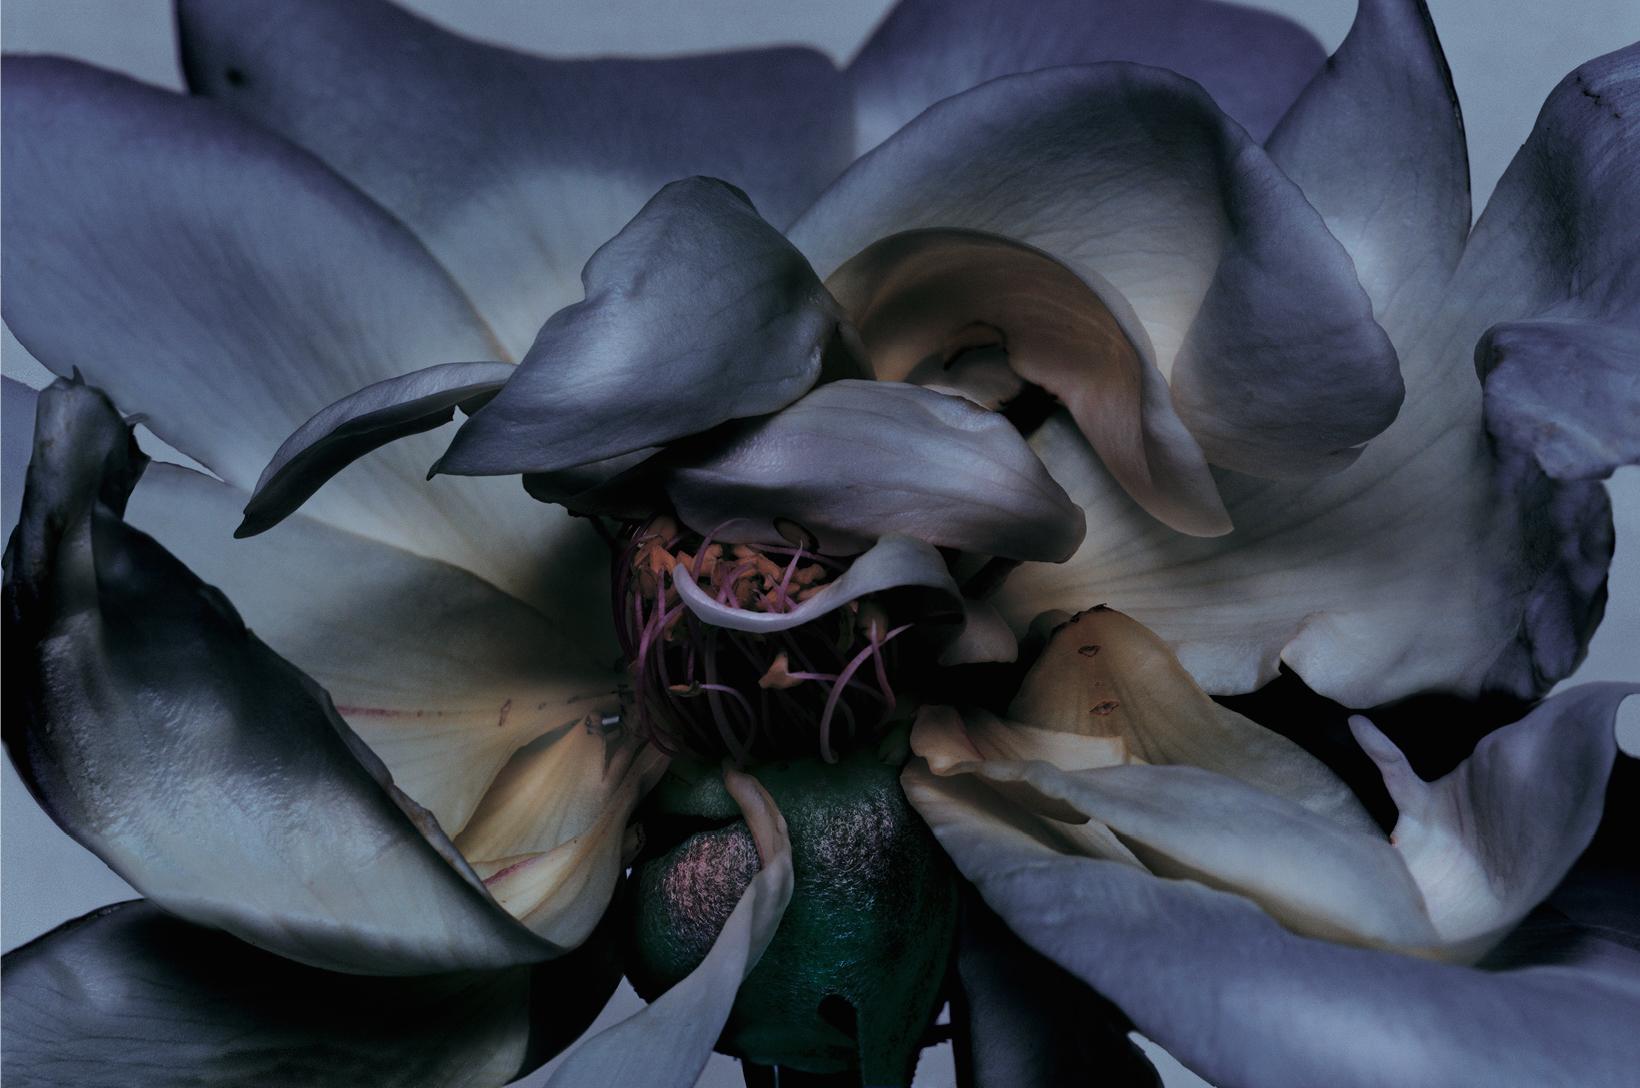 Color Photograph Nick Knight - Photographies, photographies, fleurs, roses